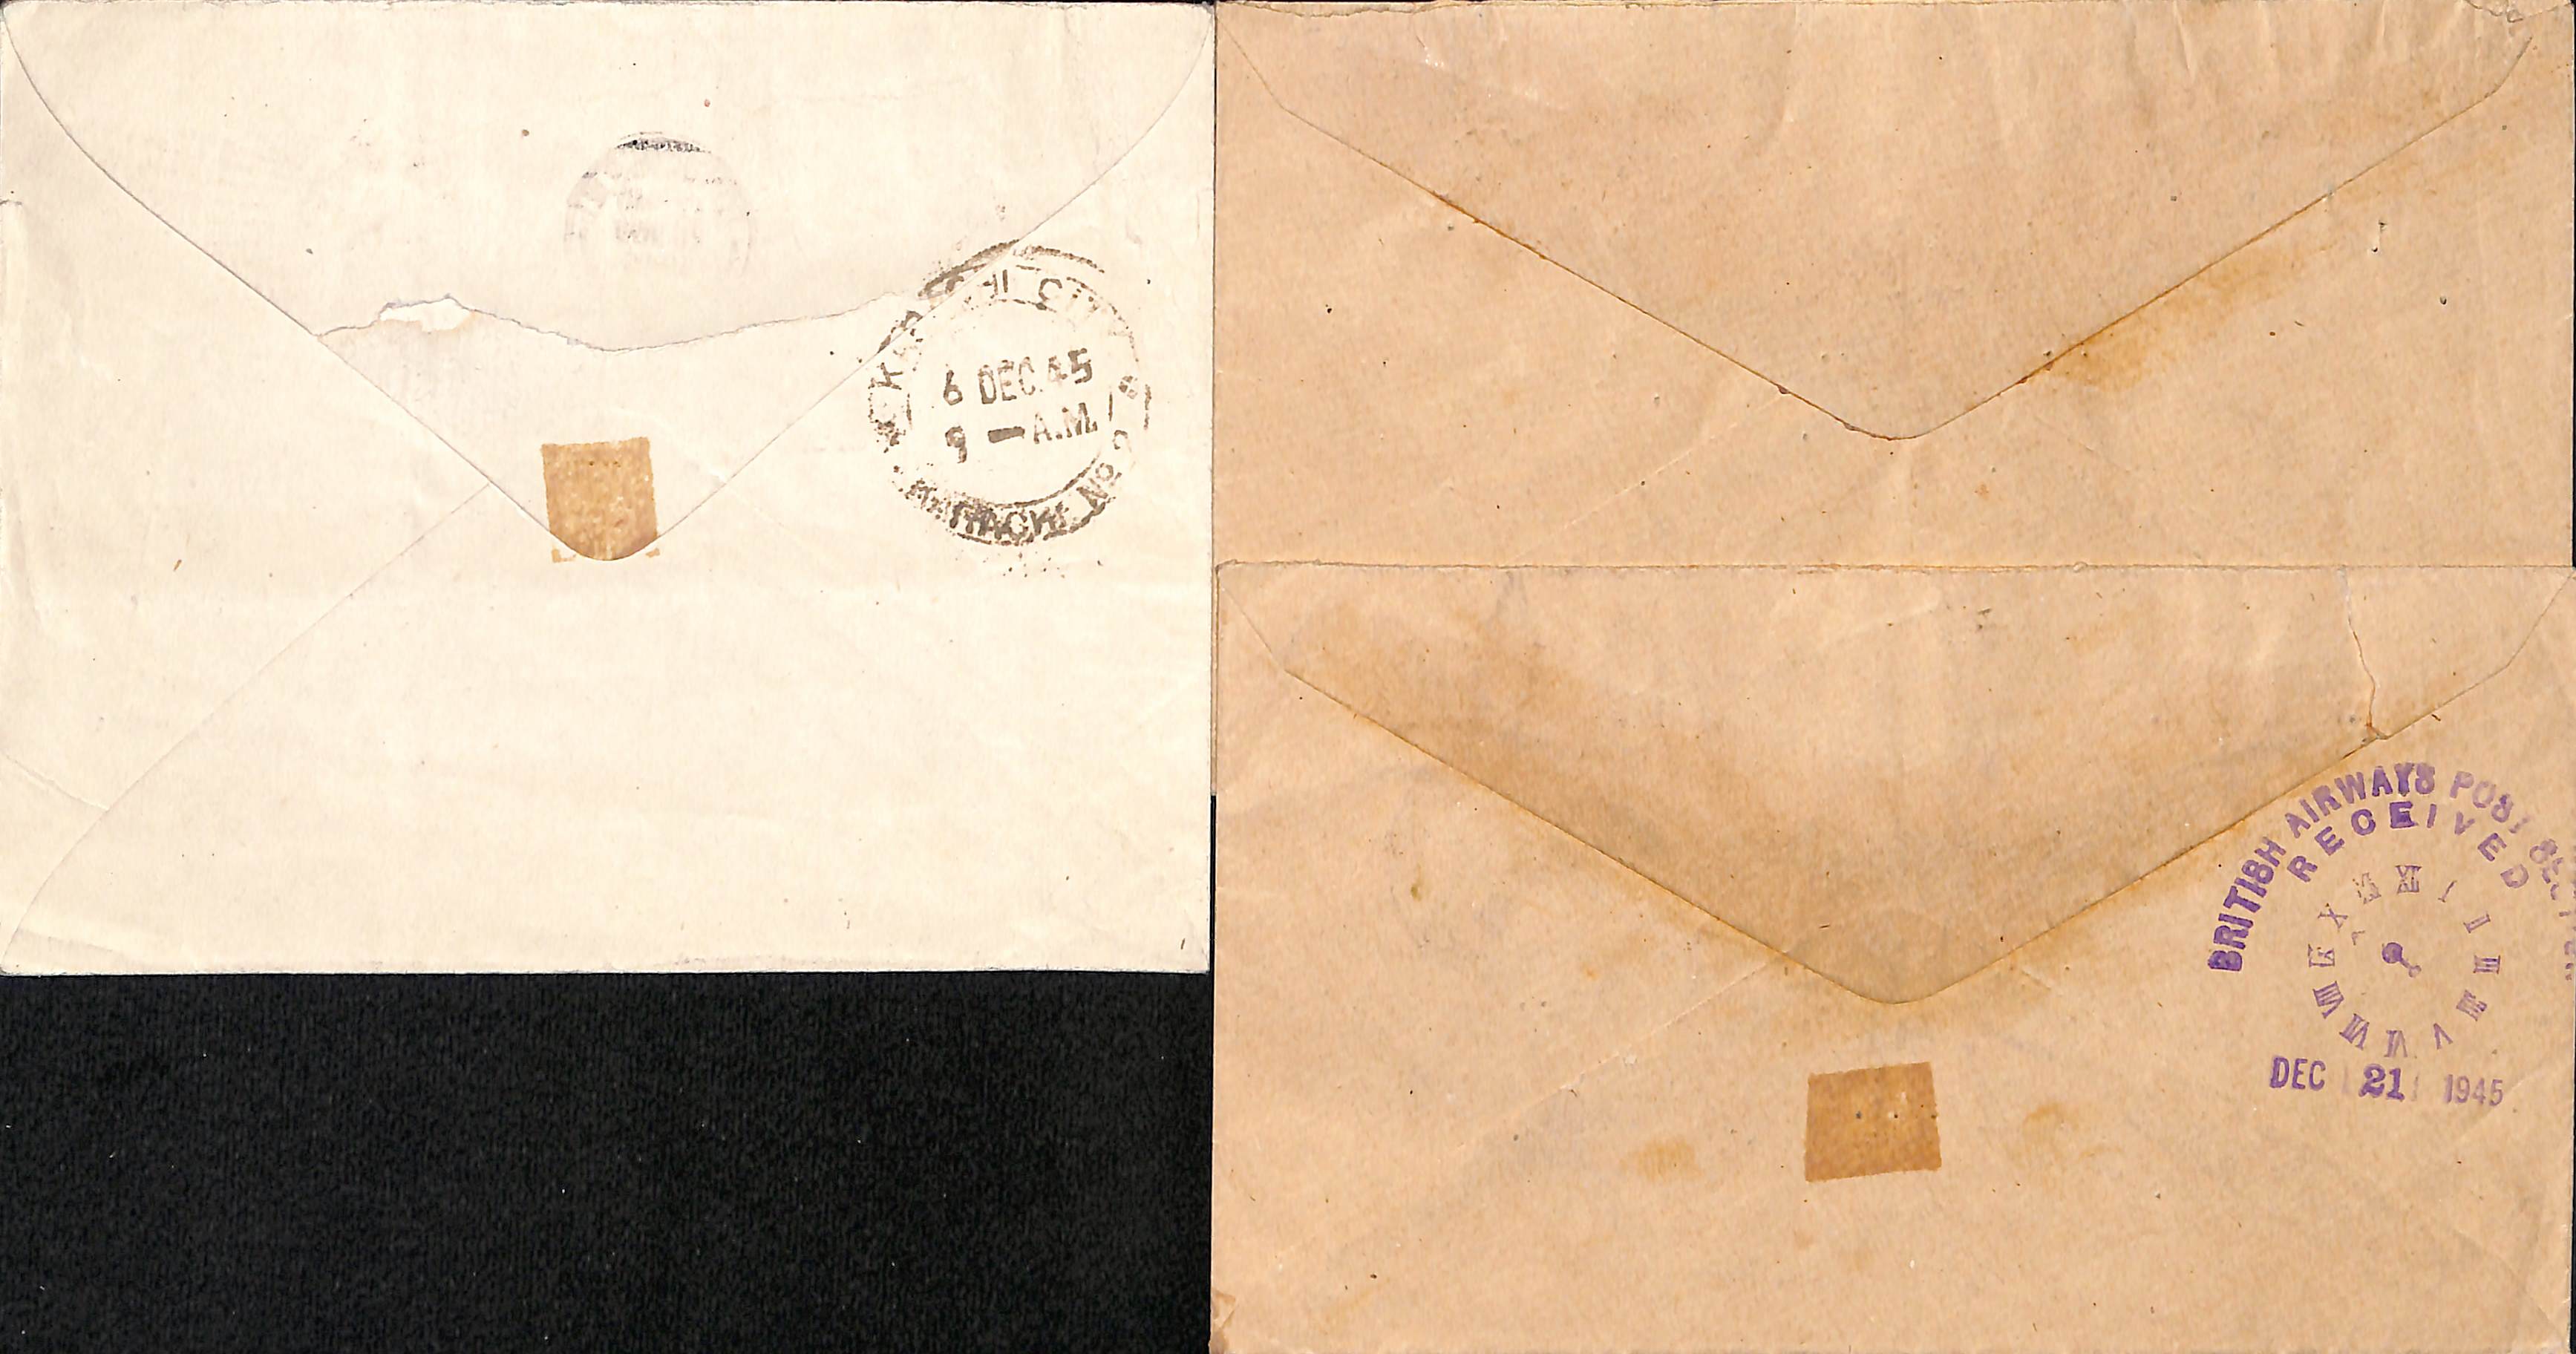 1945-46 B.O.A.C Test letters, 1945 (Nov 28) Cover from London to Karachi with enclosed test letter - Image 2 of 2